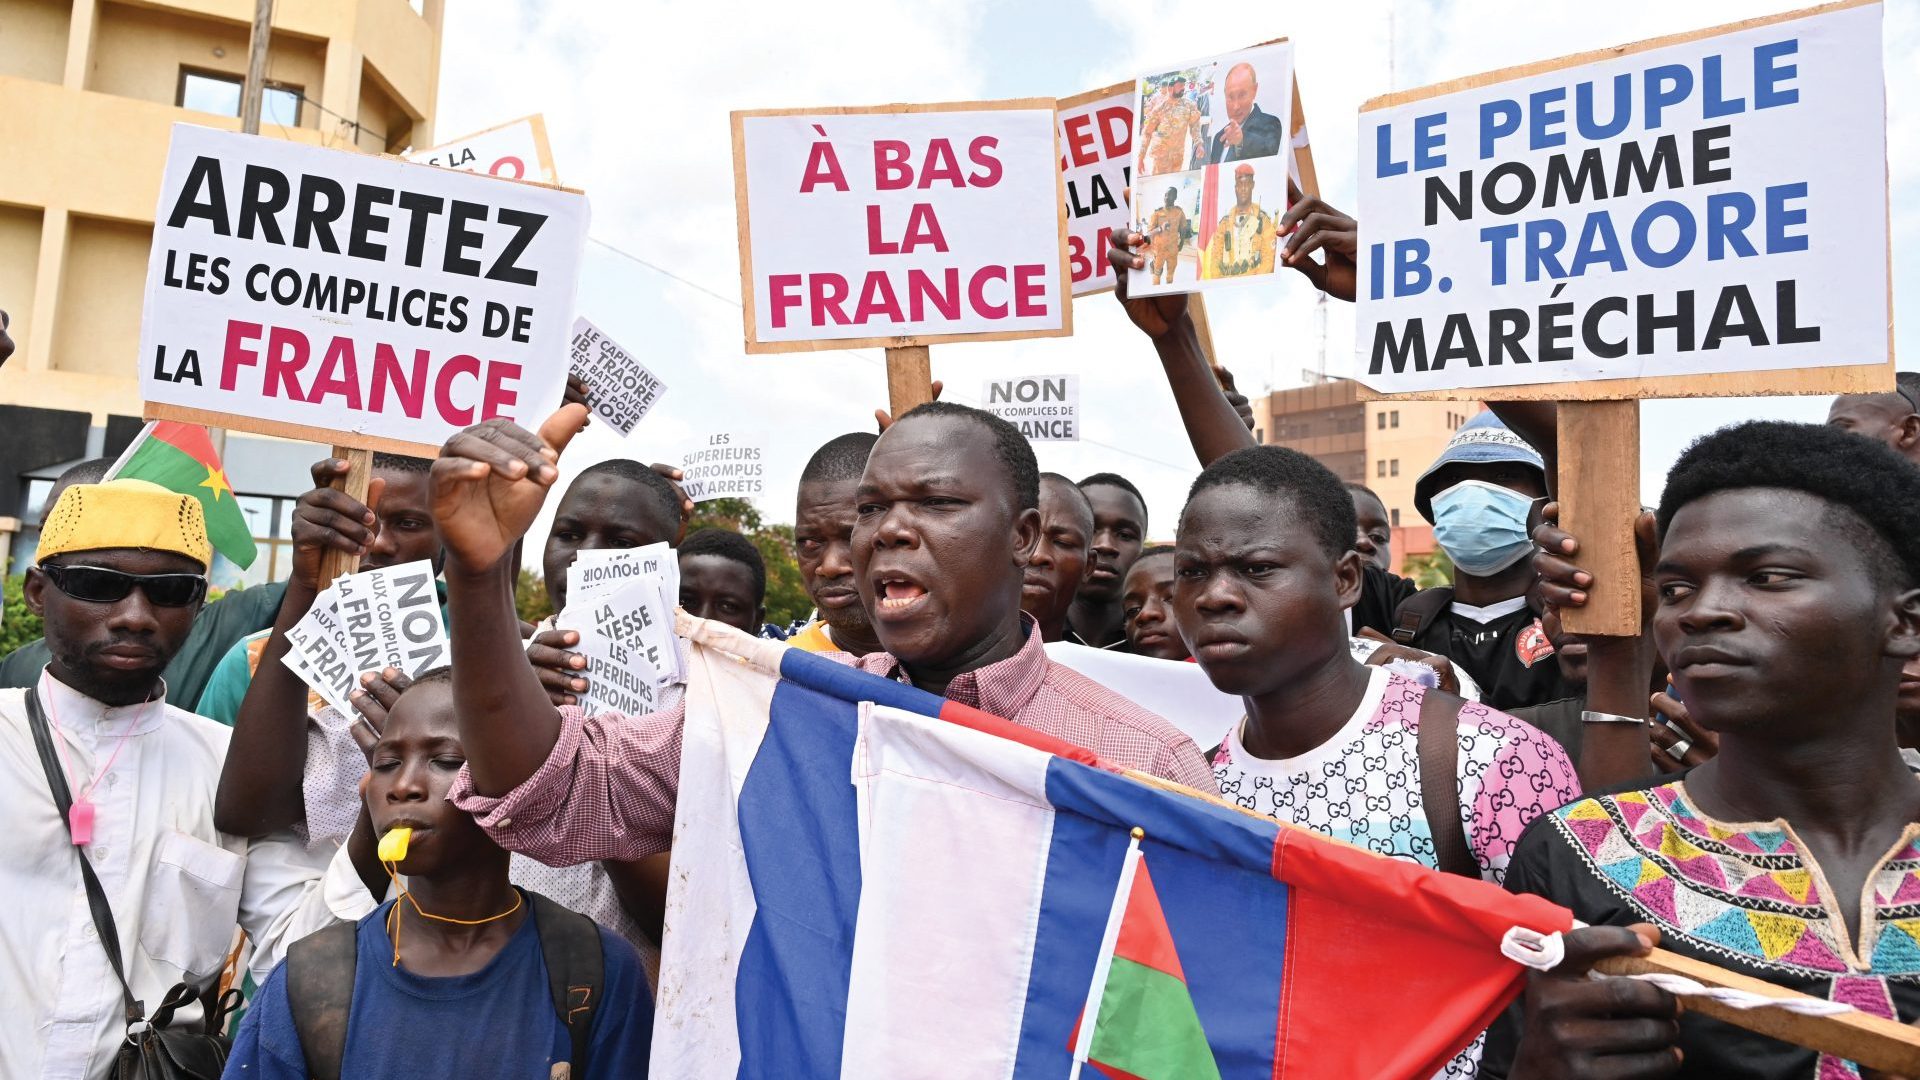 Protesters demonstrate against France and the 
Economic Community 
of West African States in Ouagadougou, Burkina Faso, on October 4, 2022. Photo: Issouf Sanogo/AFP/
Getty